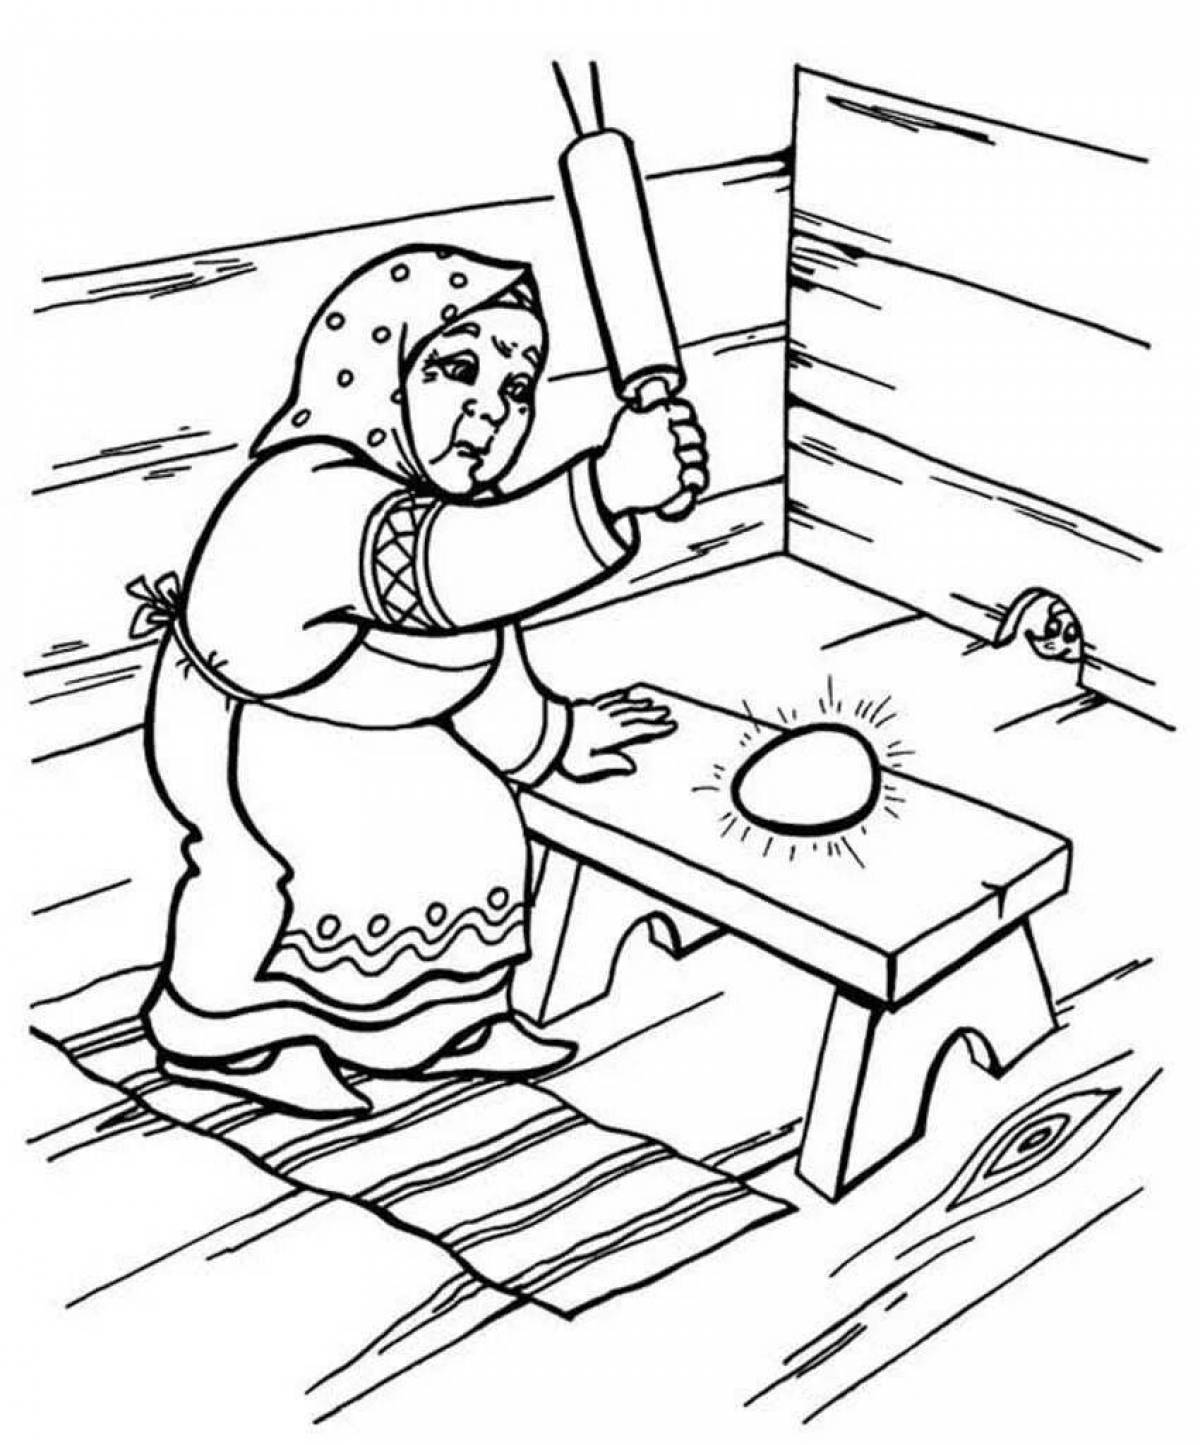 Chicken pockmarked coloring page for pre-k